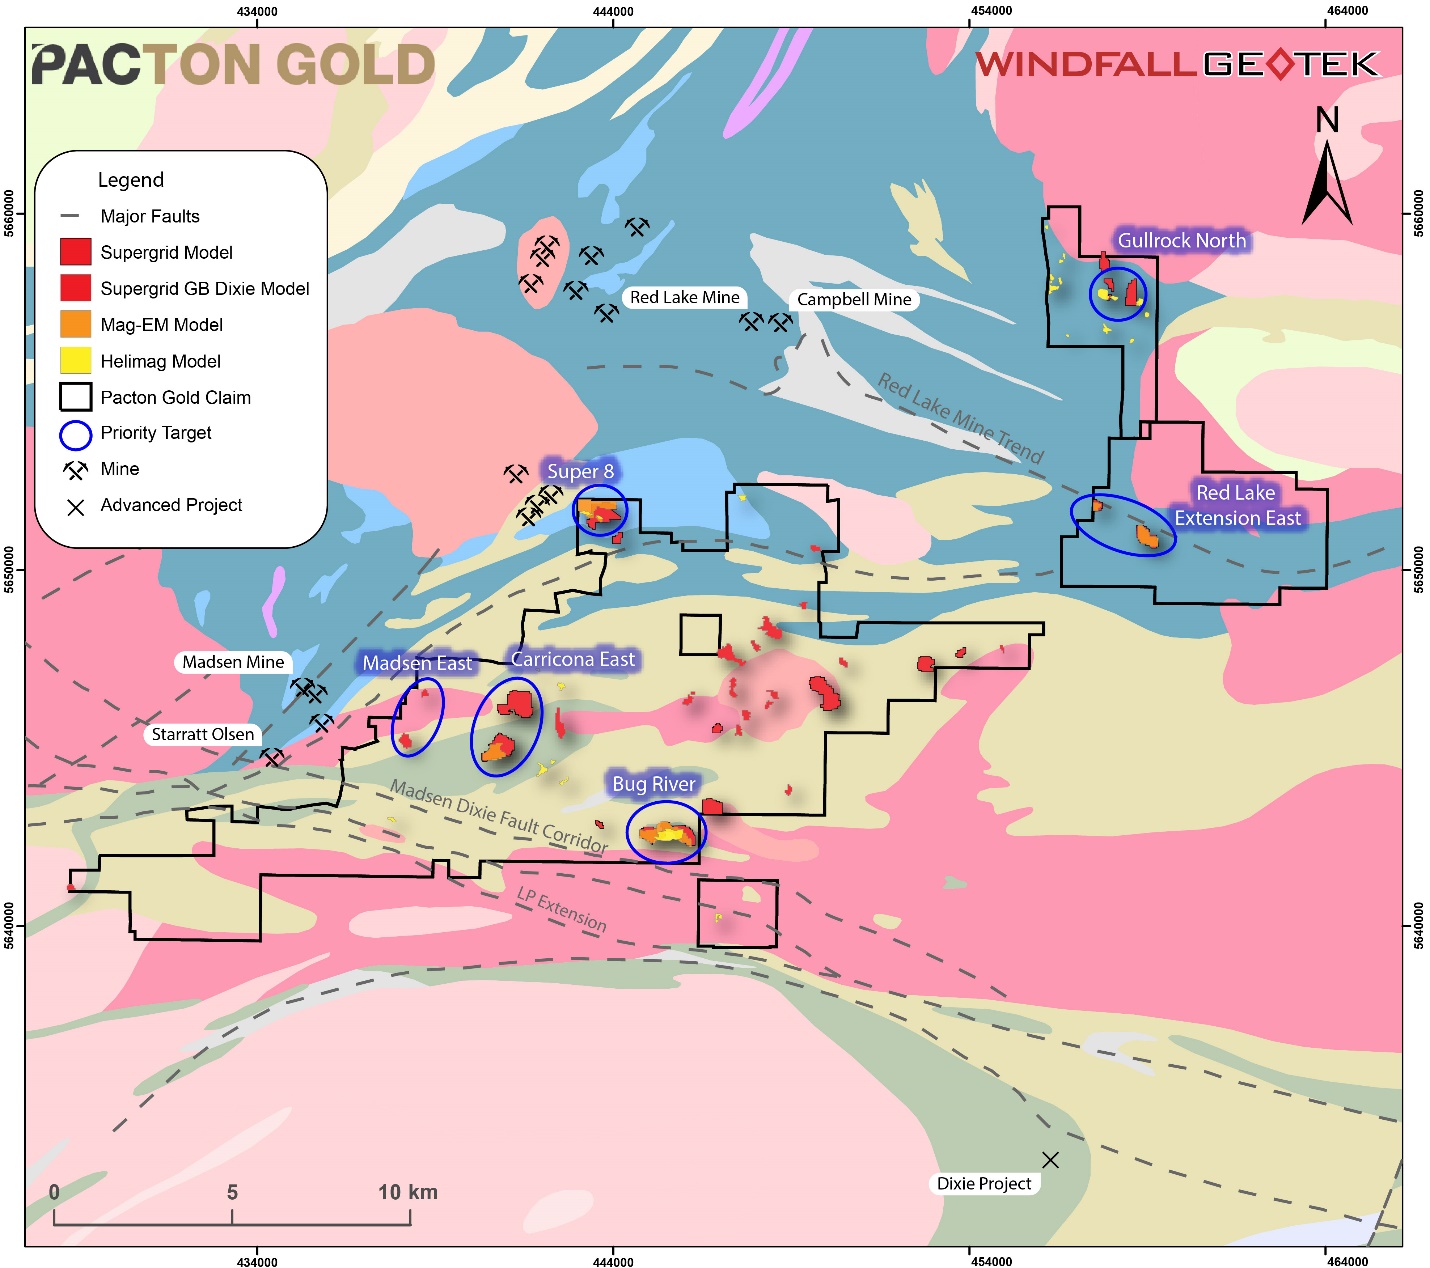 Pacton Gold, Wednesday, June 24, 2020, Press release picture